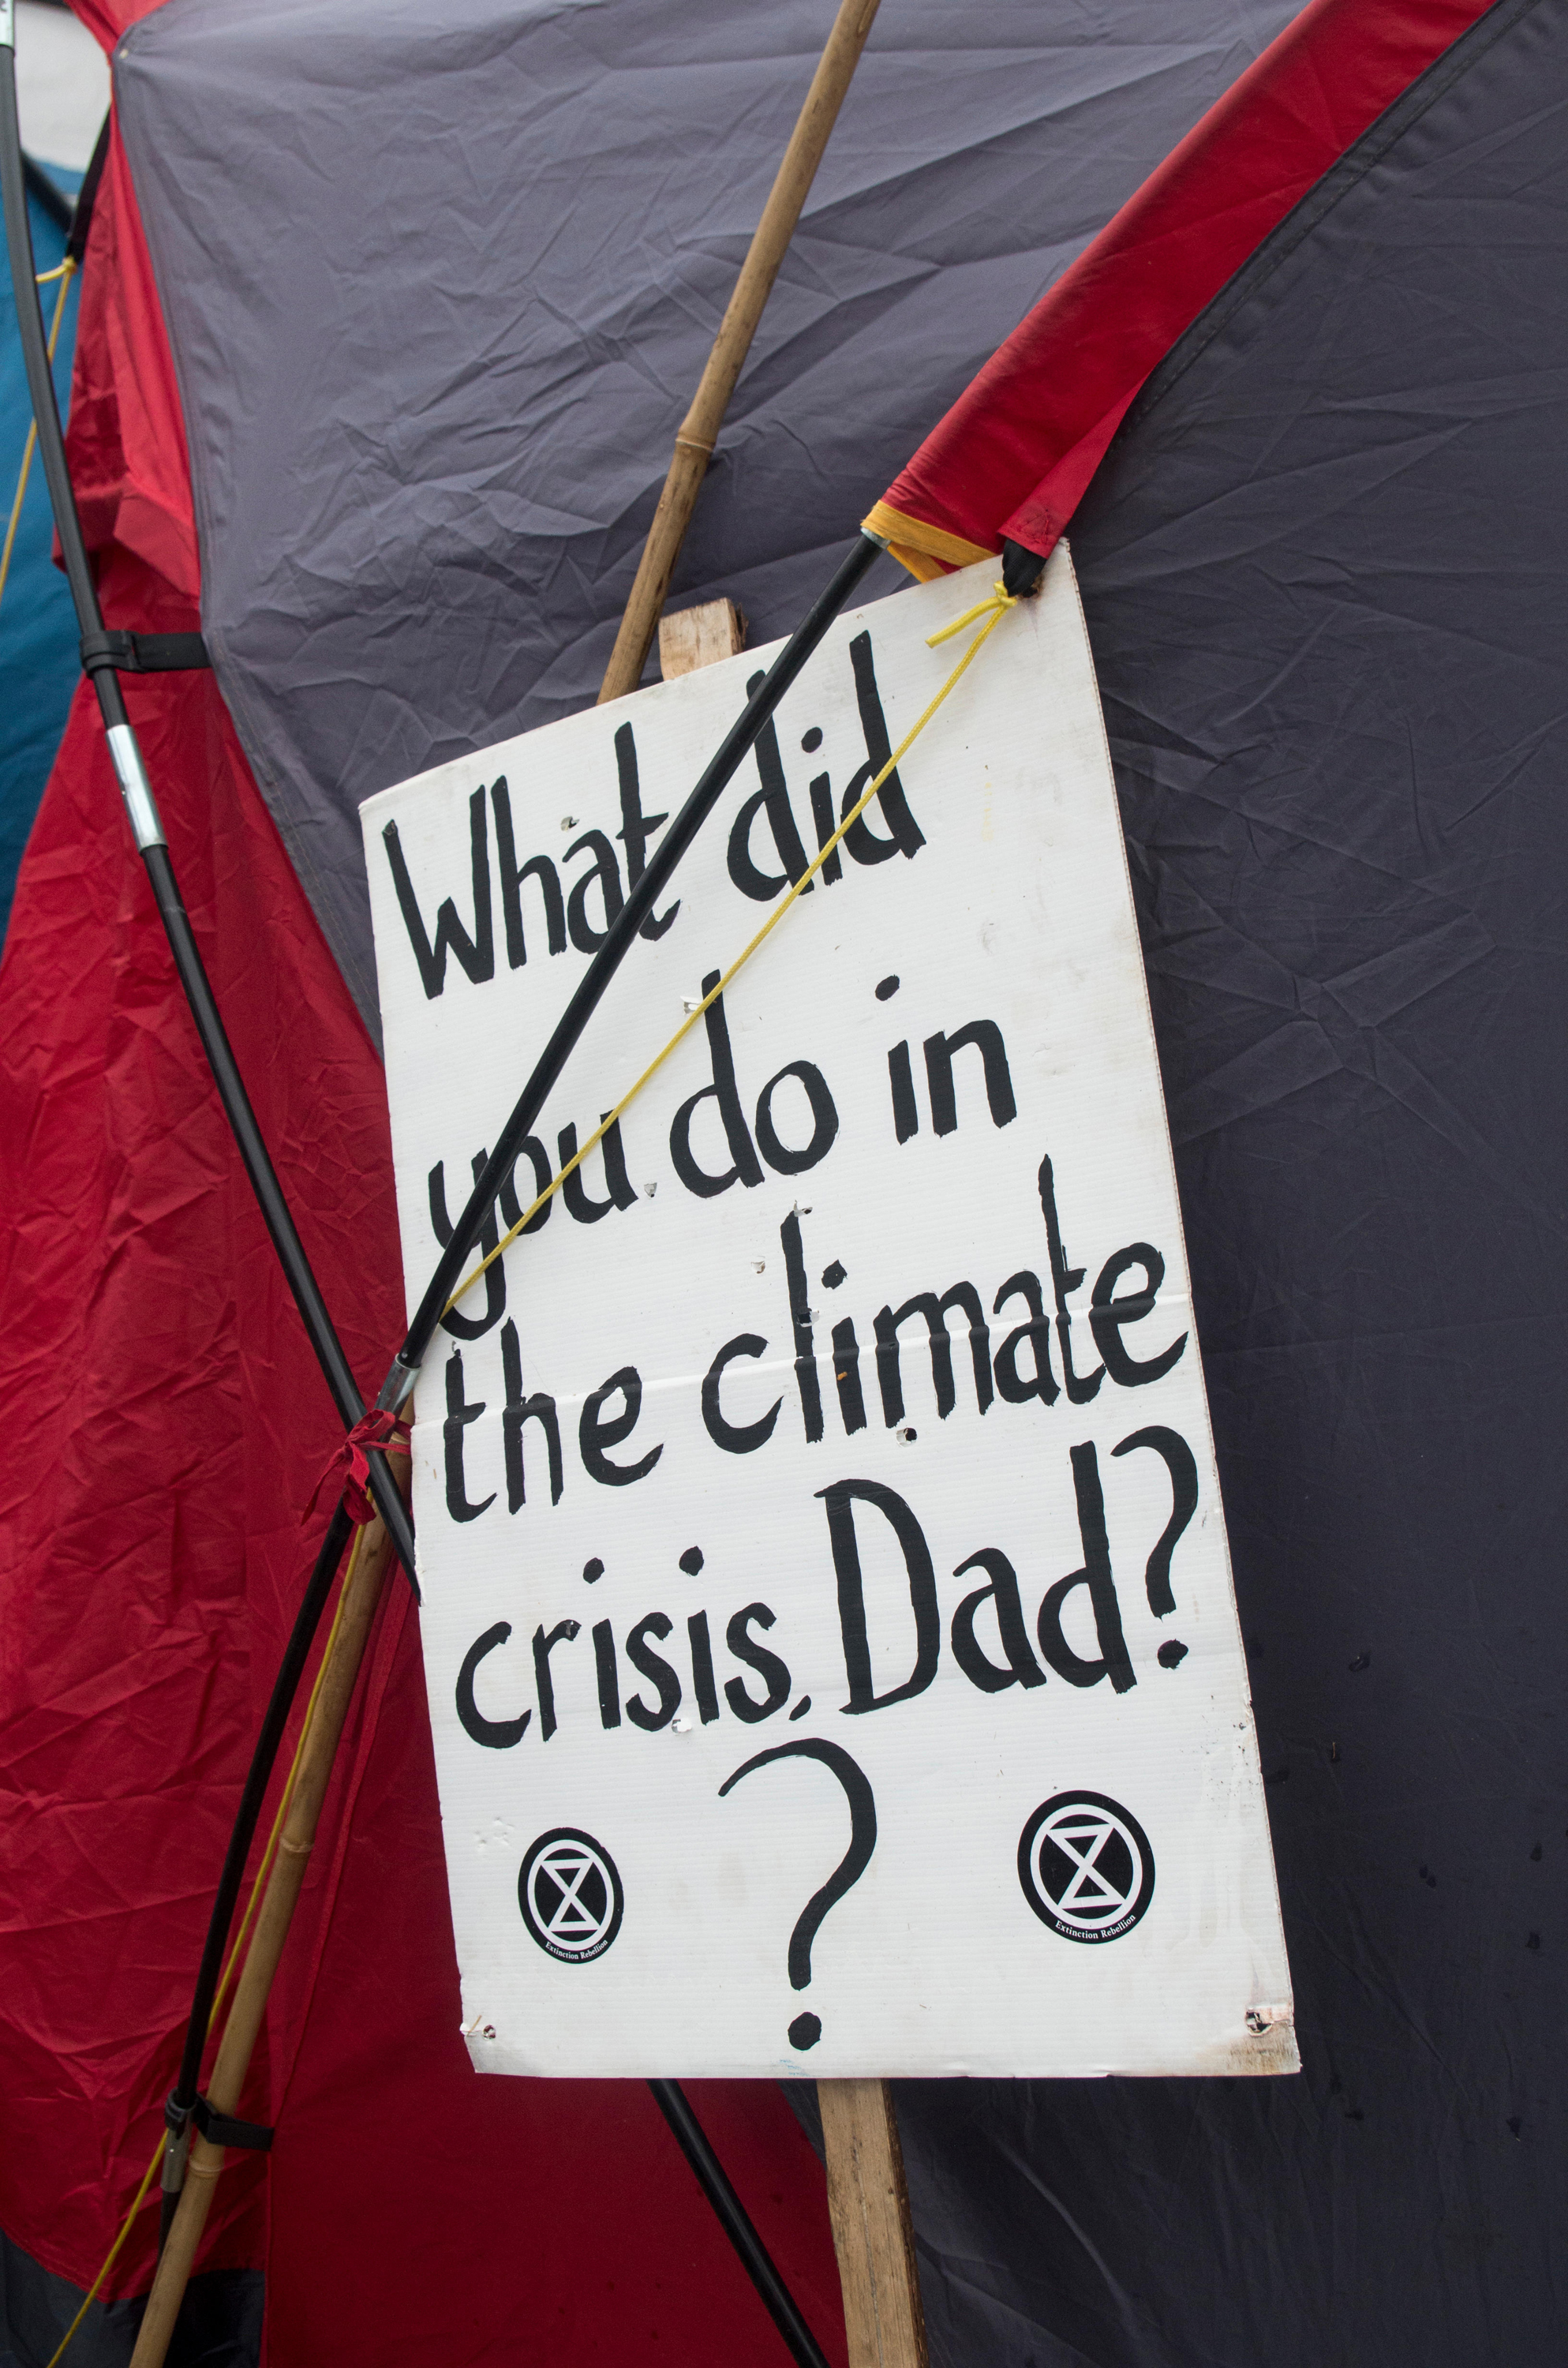 A banner that says 'what did you do in the climate crisis, dad?